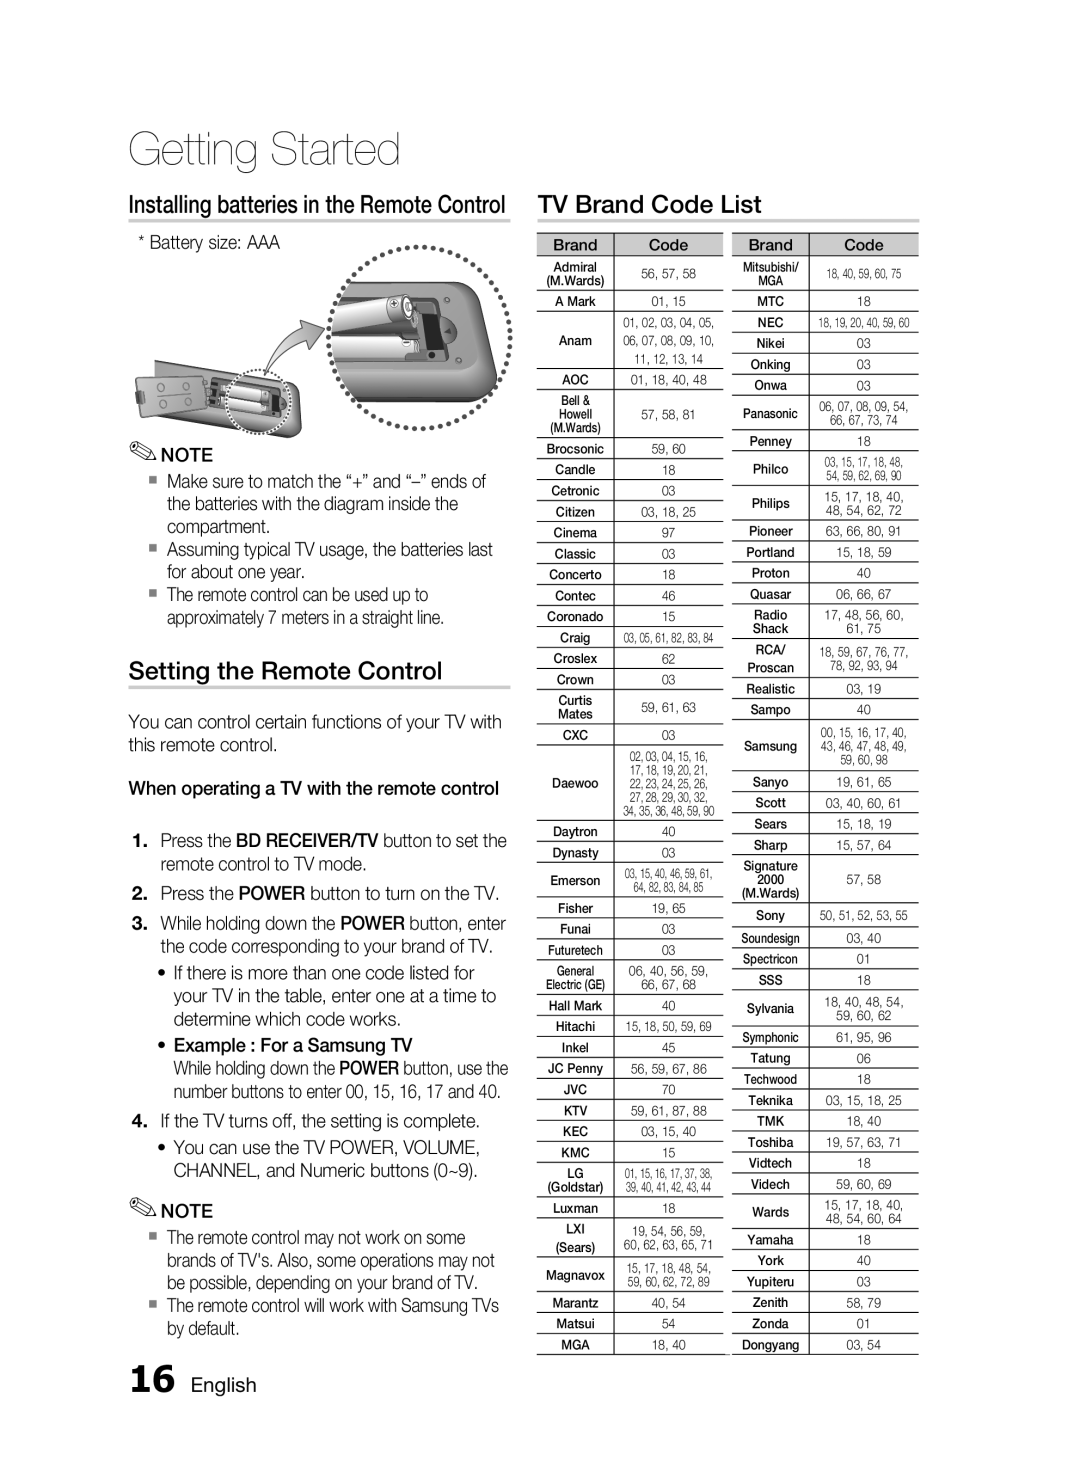 Samsung HT-C7300/XEN TV Brand Code List, Setting the Remote Control, Installing batteries in the Remote Control, English 